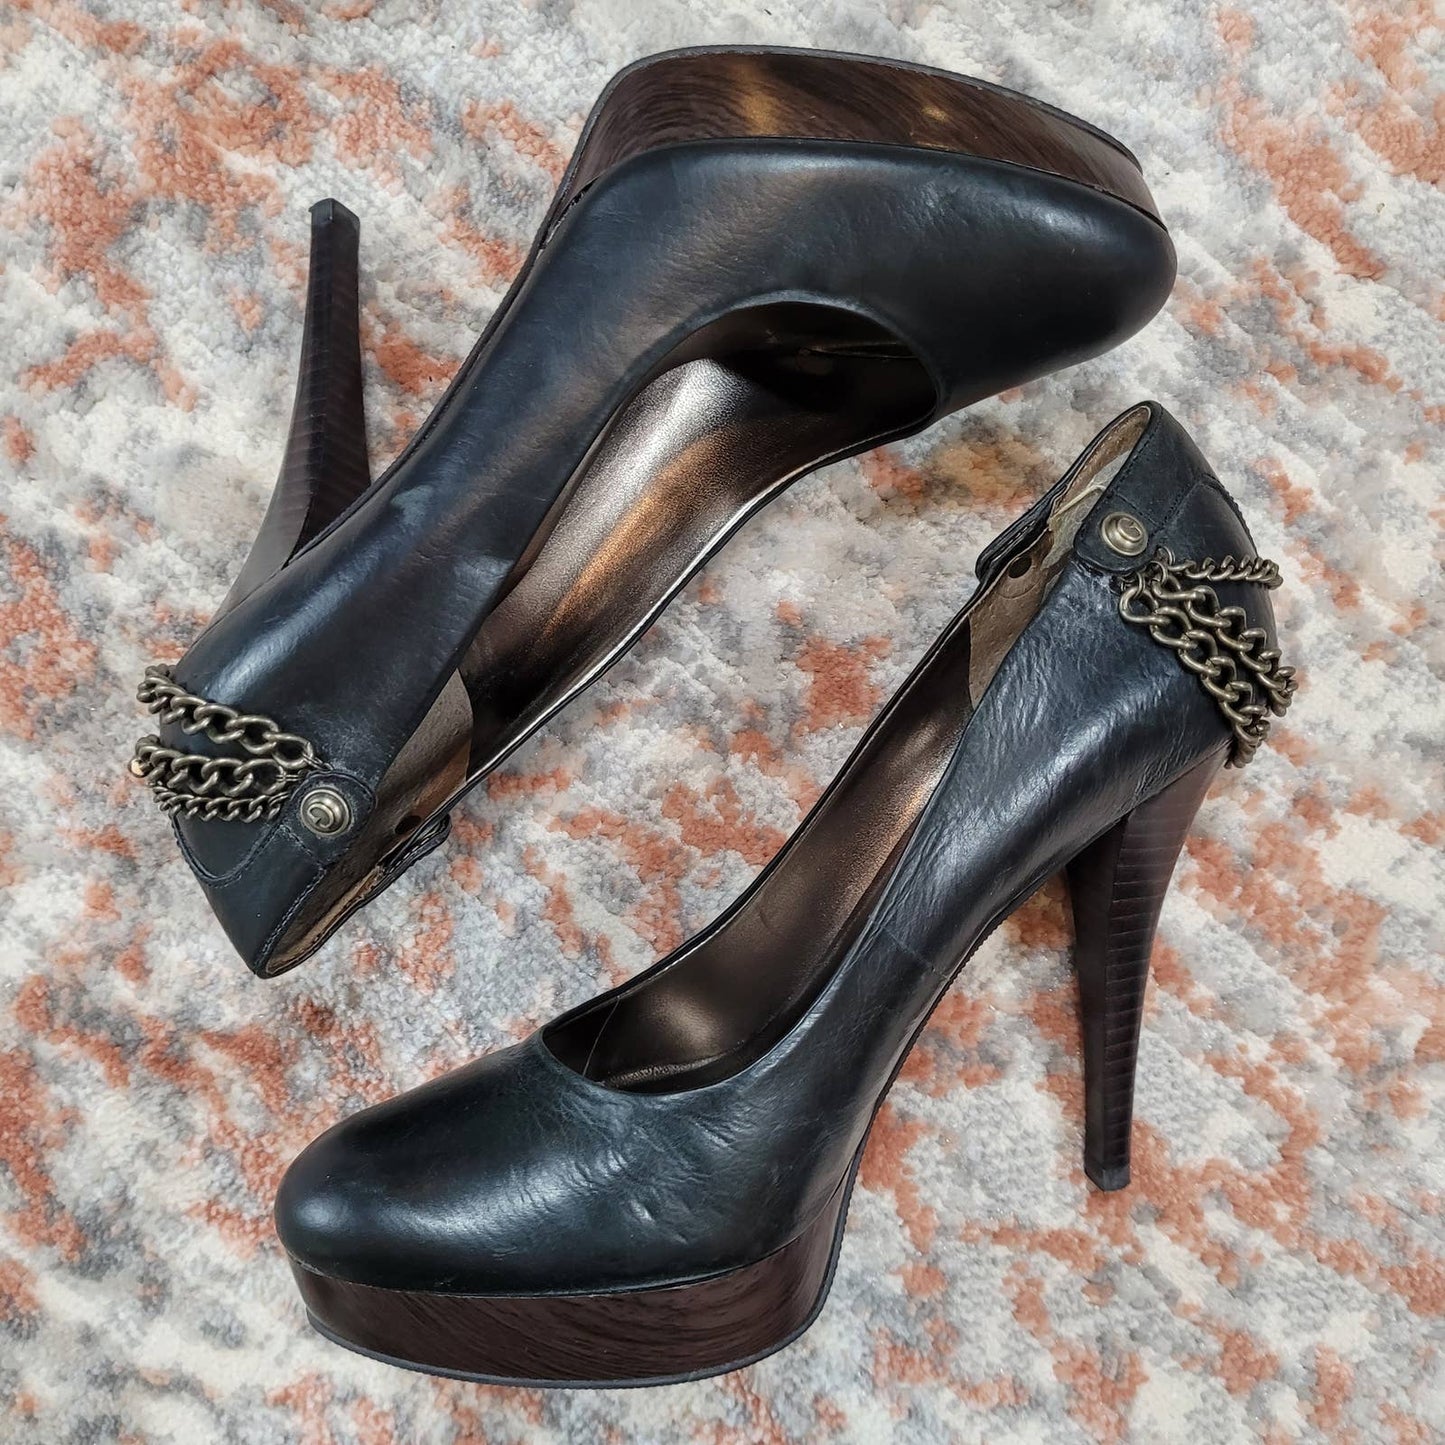 Guess Seeri Black Leather Platform Heels with 3 Chain Accent - Size 7.5Markita's ClosetGUESS